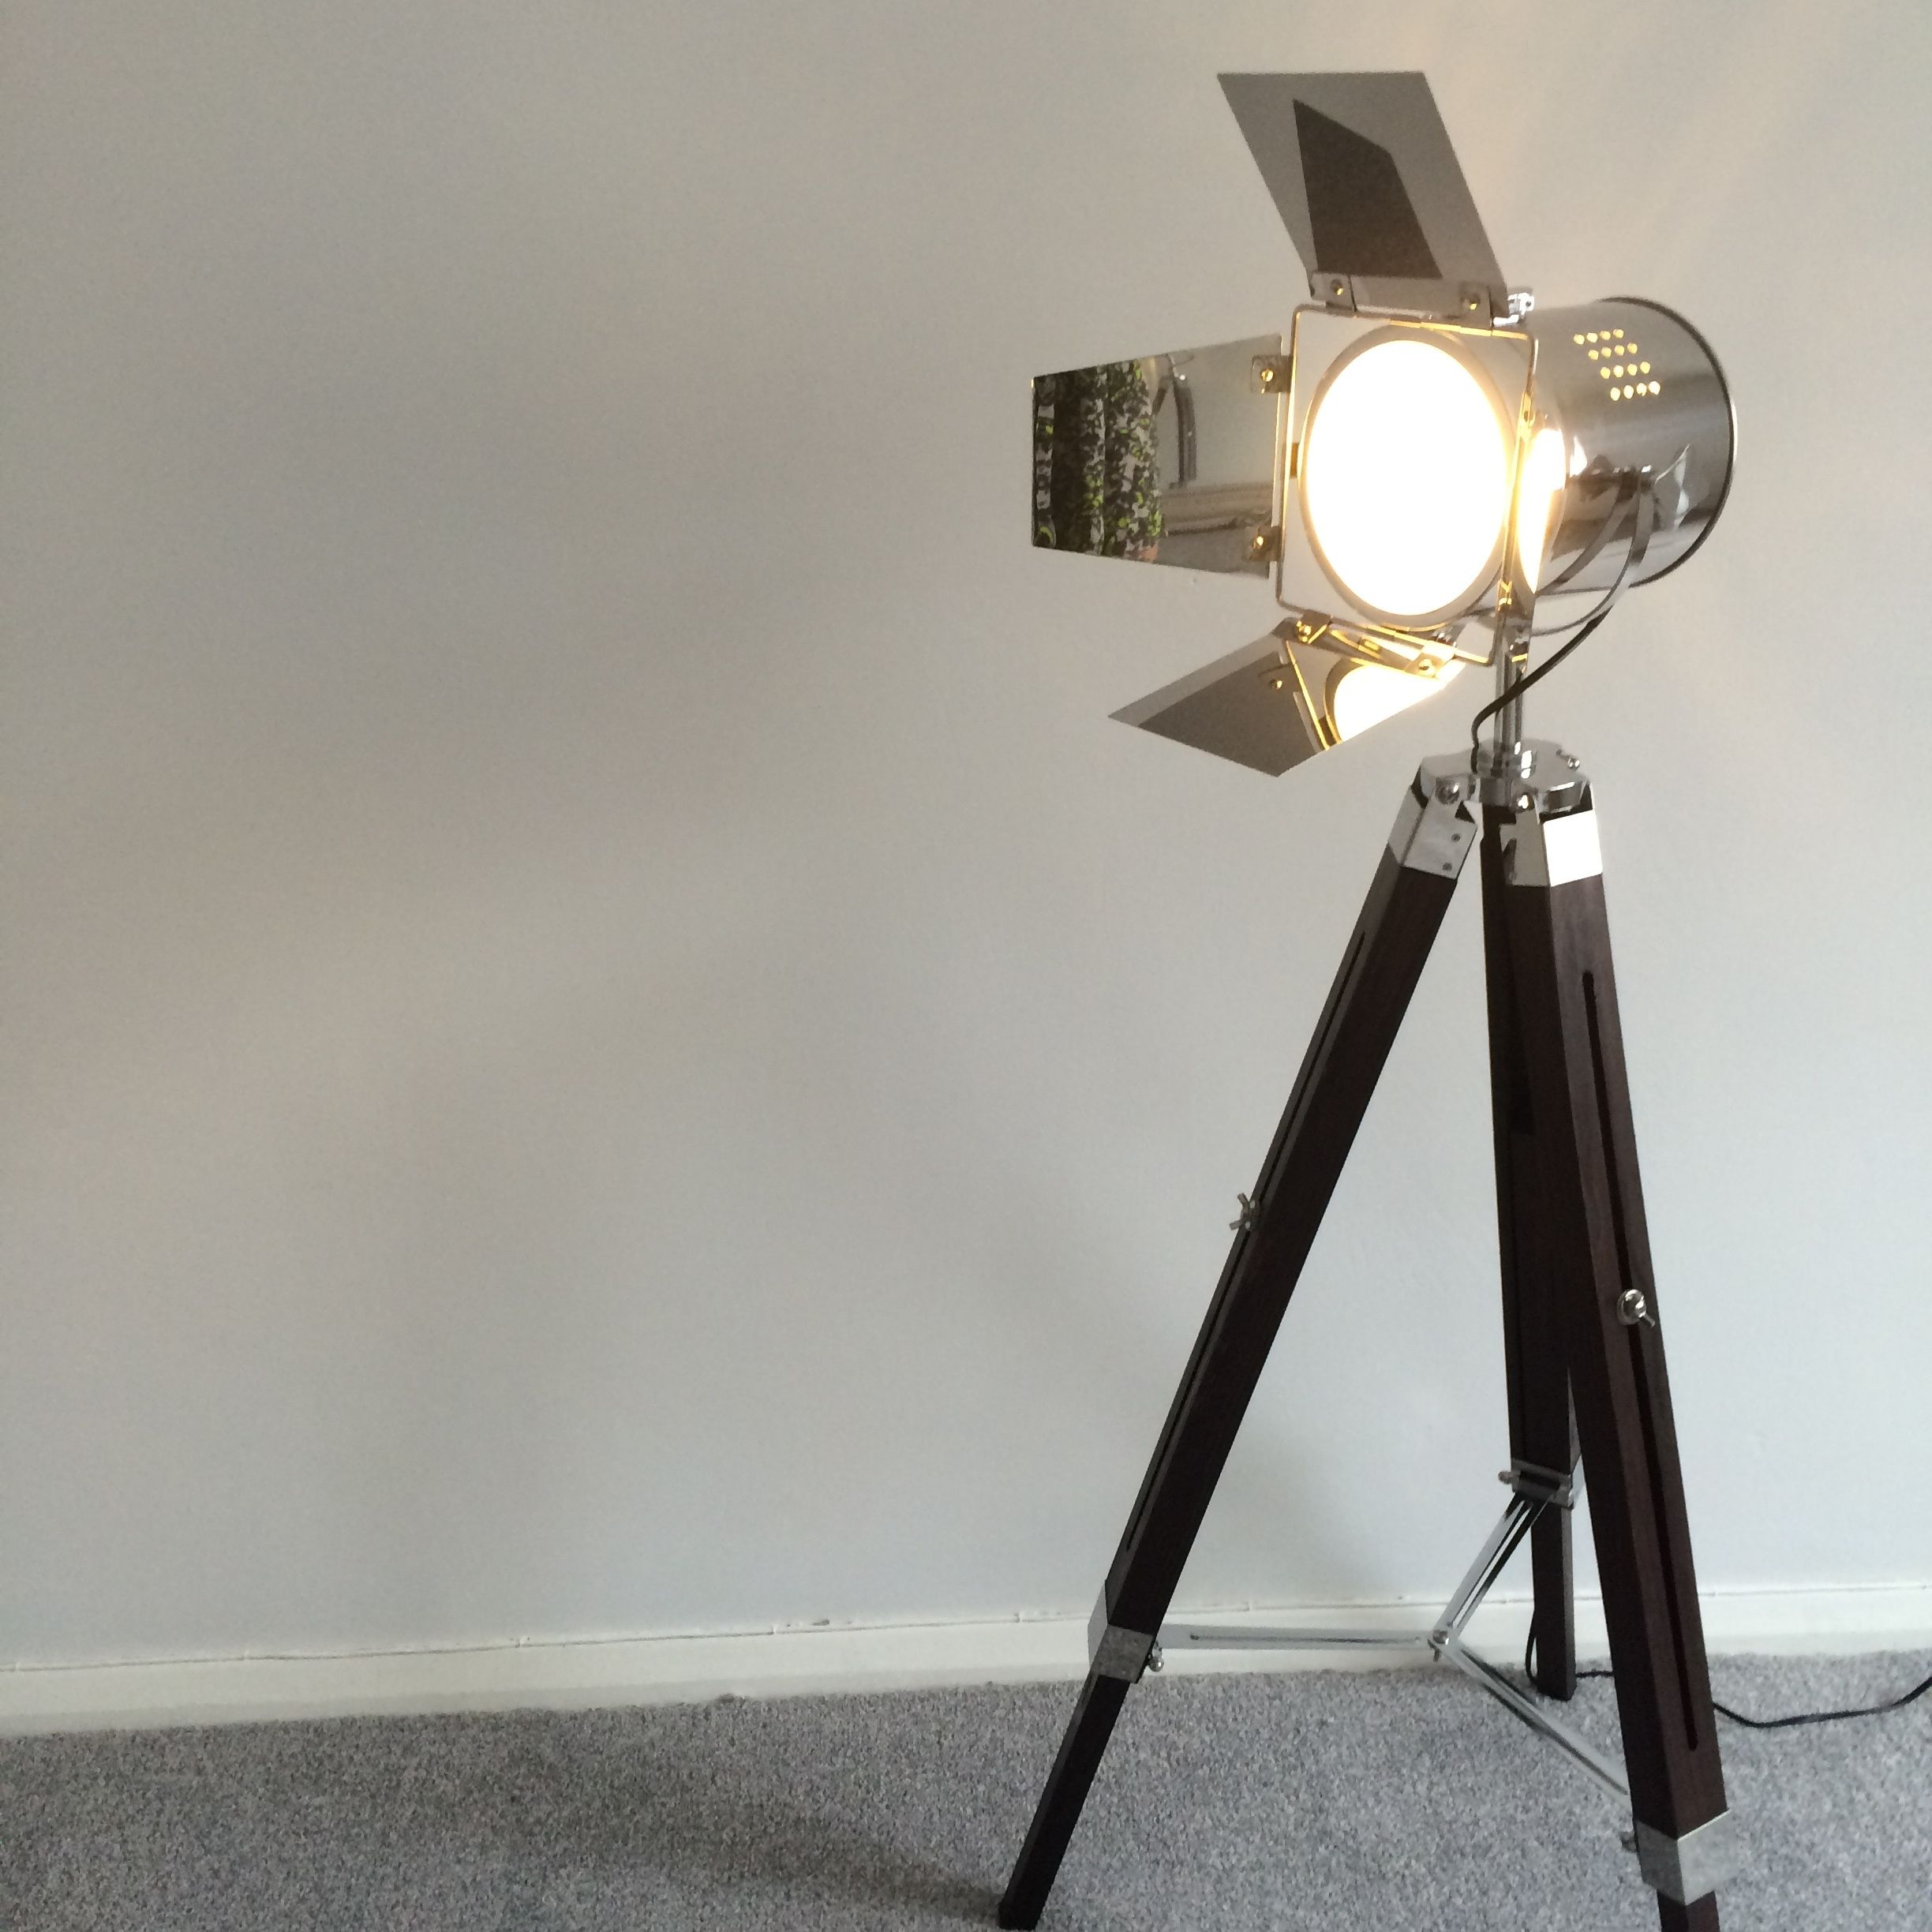 Floor Lamp In Style Of Old School Film Camera Set Old within measurements 2448 X 2448